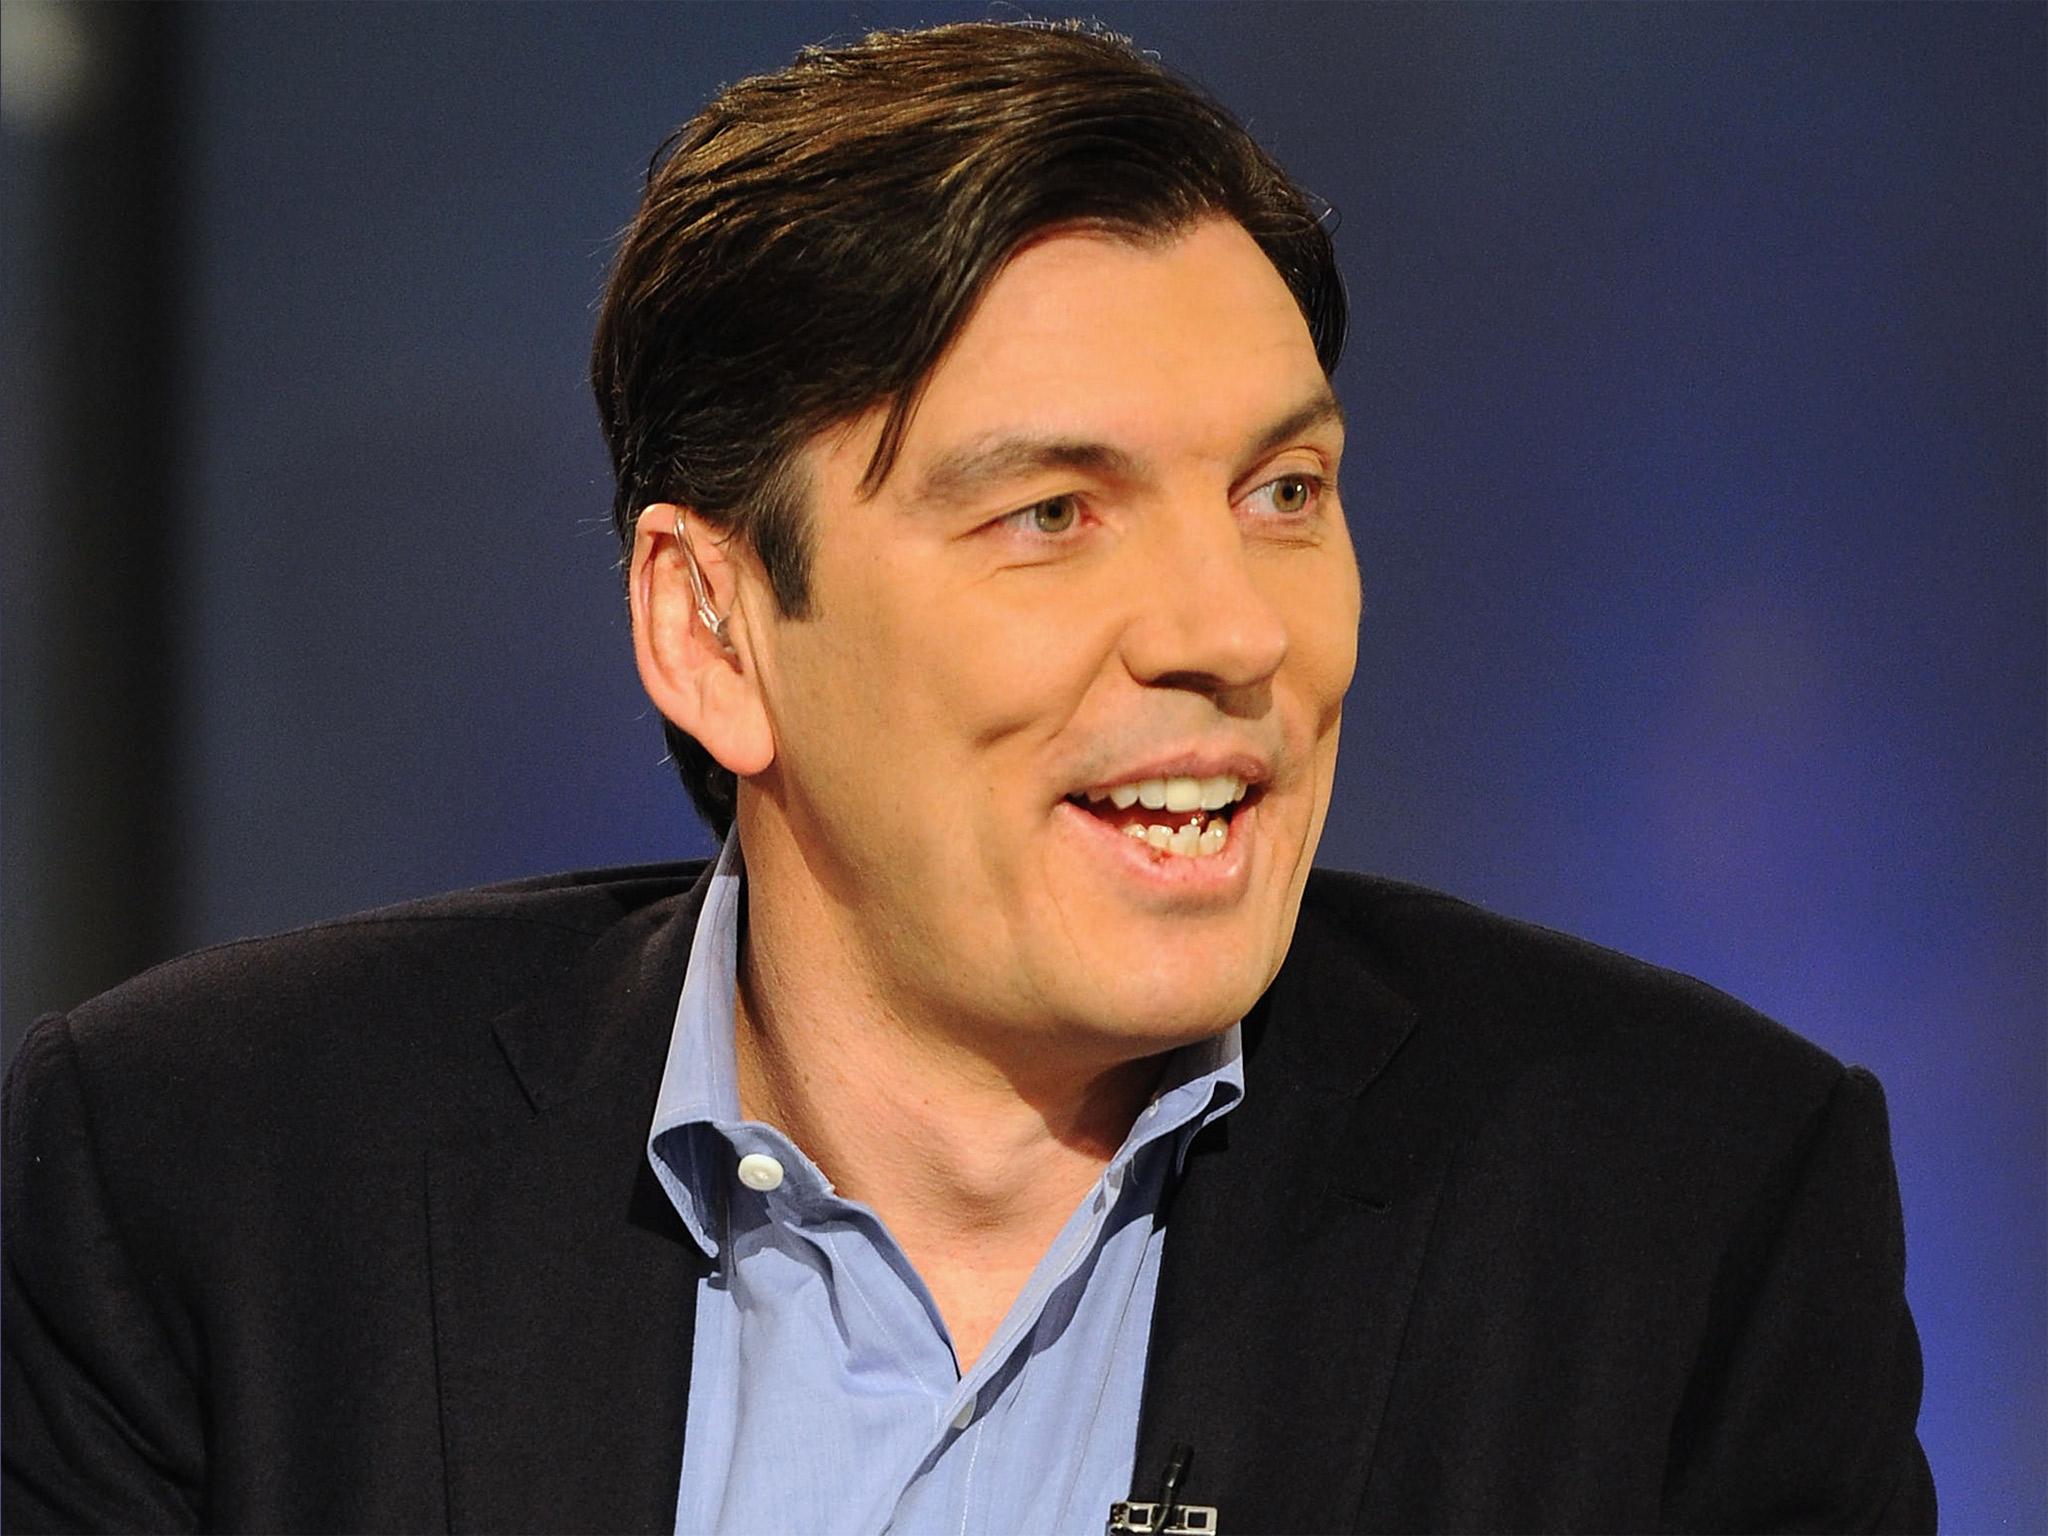 Tim Armstrong has announced that the business he runs will be called Oath